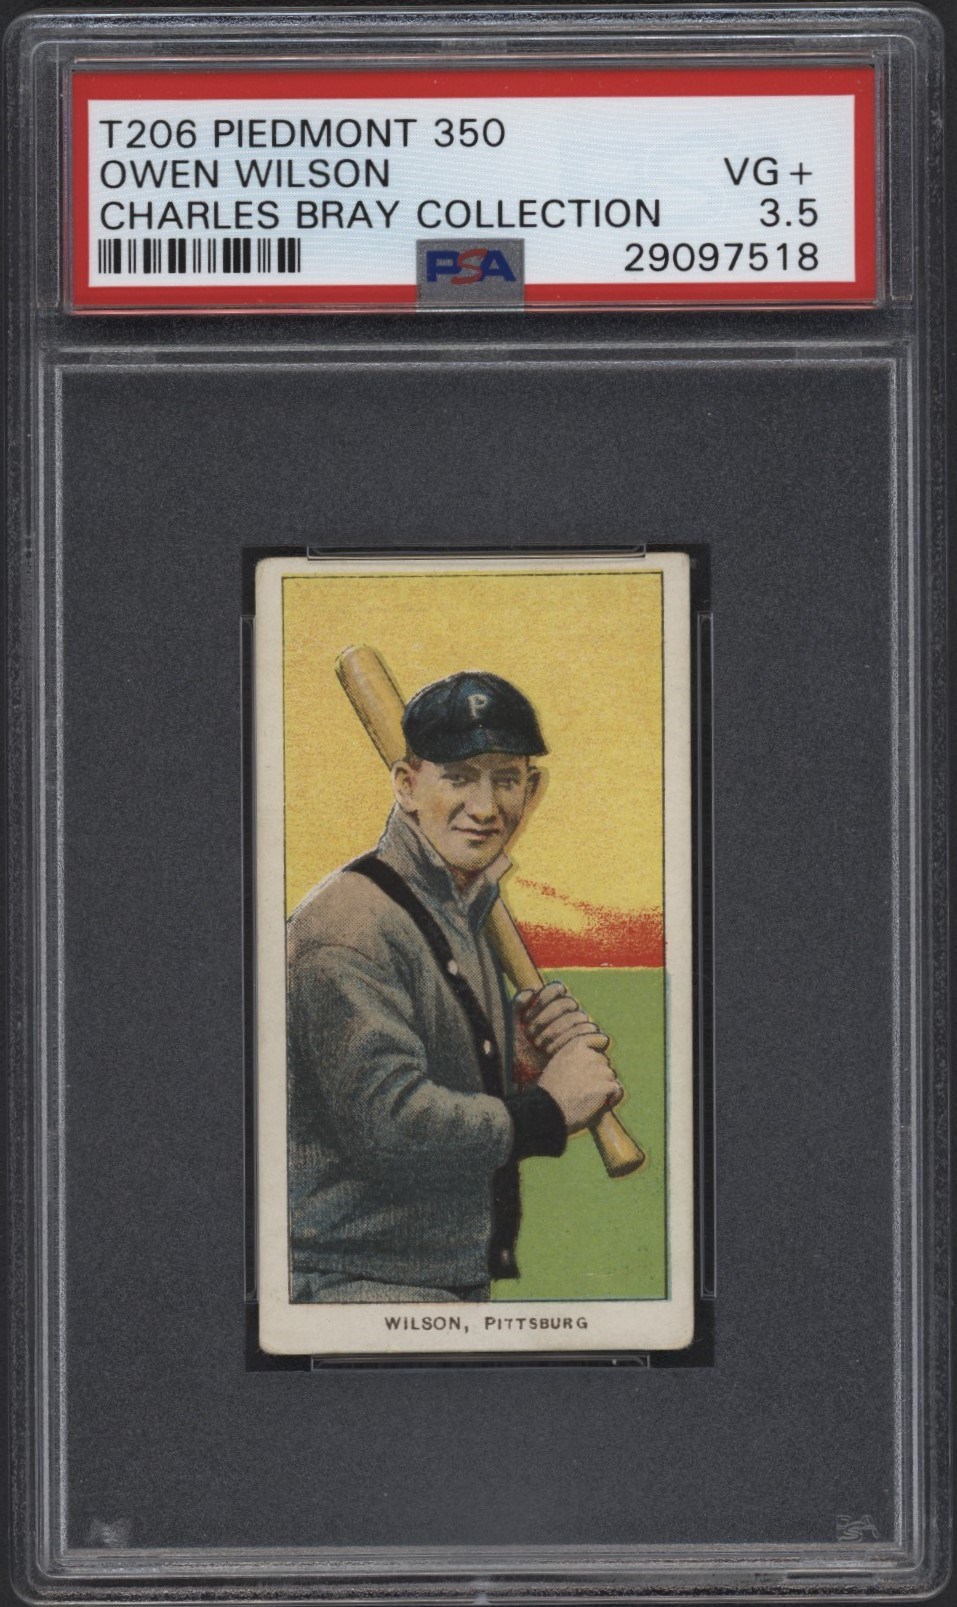 T206 Piedmont 350 Owen Wilson PSA 3.5 From the Charles Bray Collection